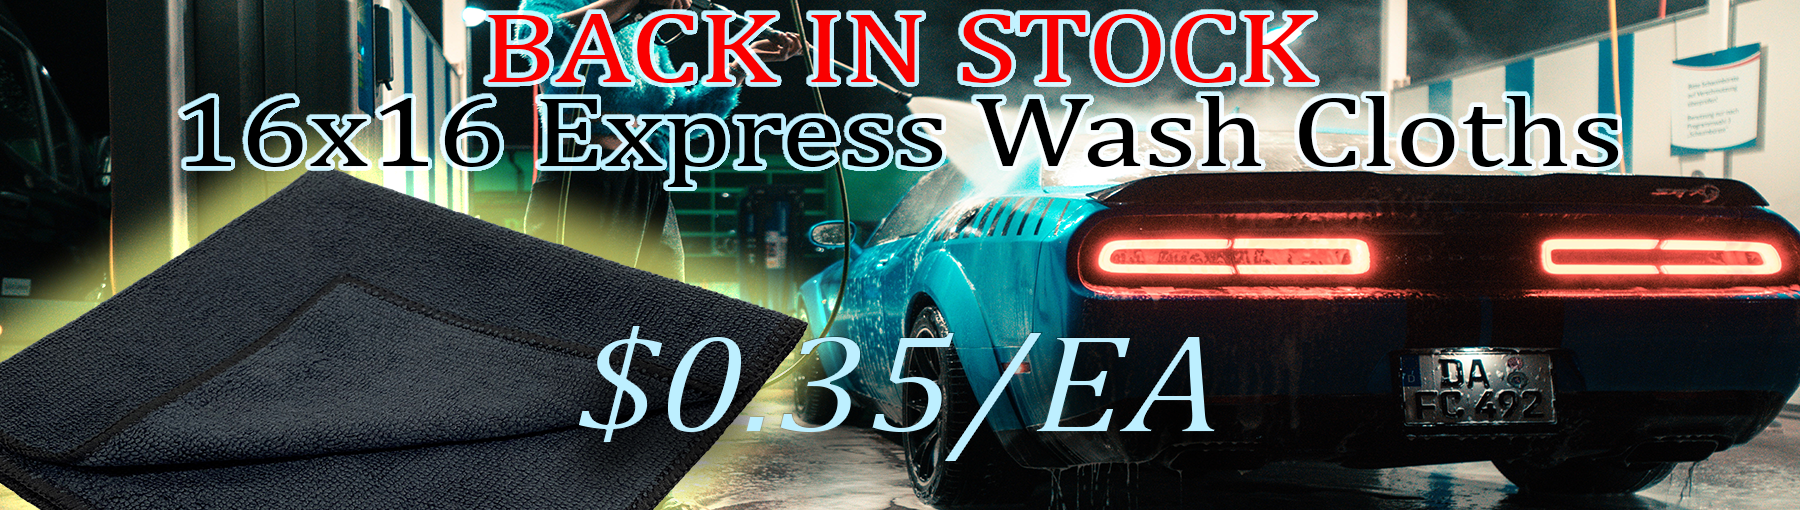 New 16x16 Express Wash Cloths for Car Washes. Just $0.35 each. By Car Washes, for Car Washes